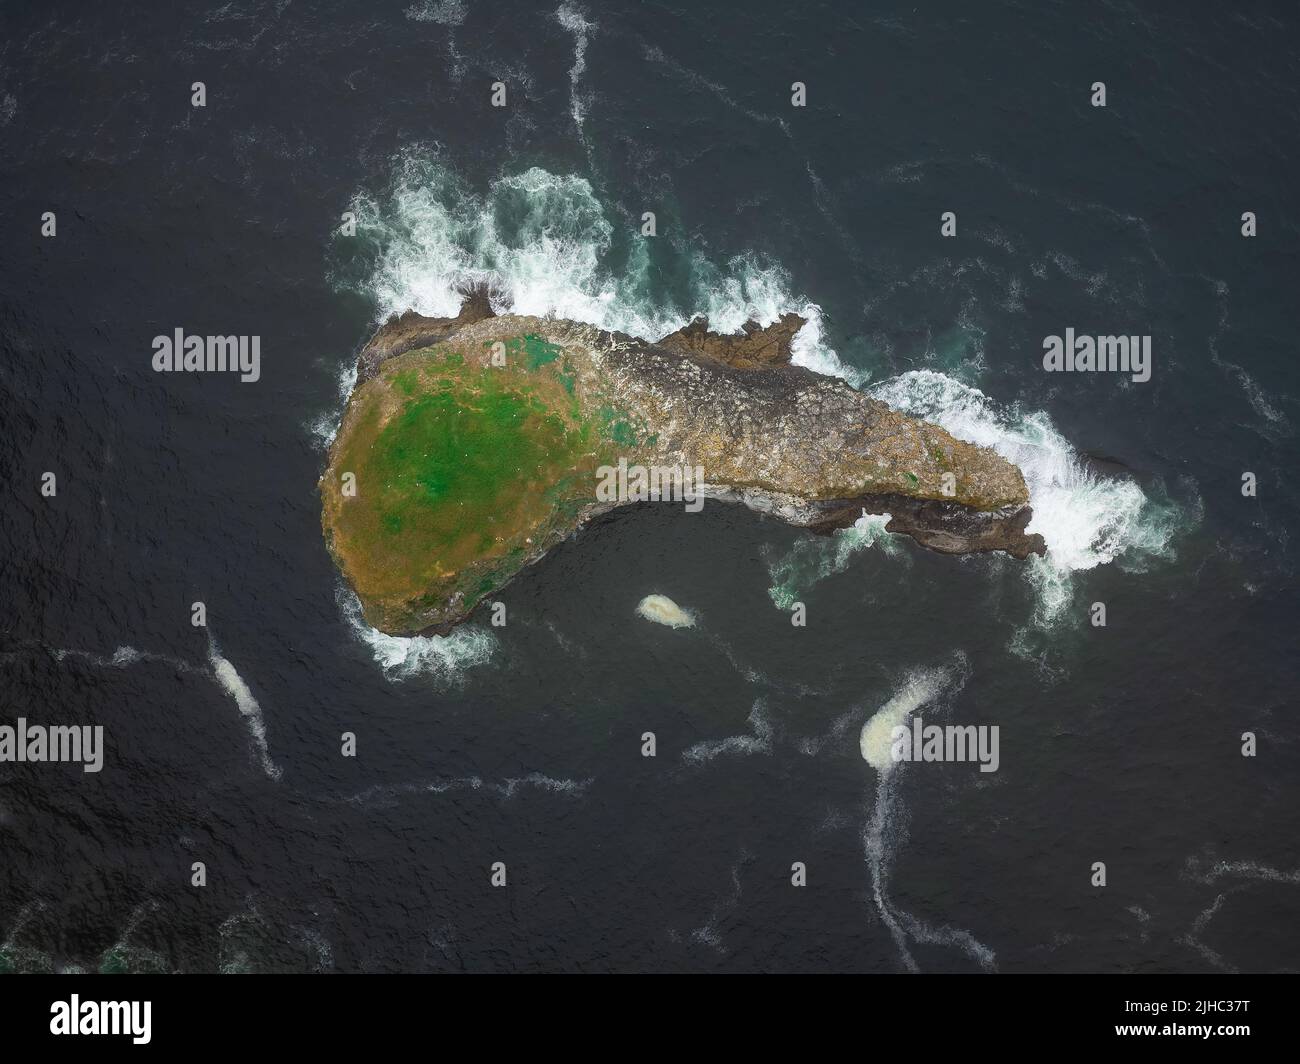 Shooting from a drone. A bizarre stone island in the ocean in the shape of a fish, covered with moss. Beauty of nature. There are no people in the pho Stock Photo